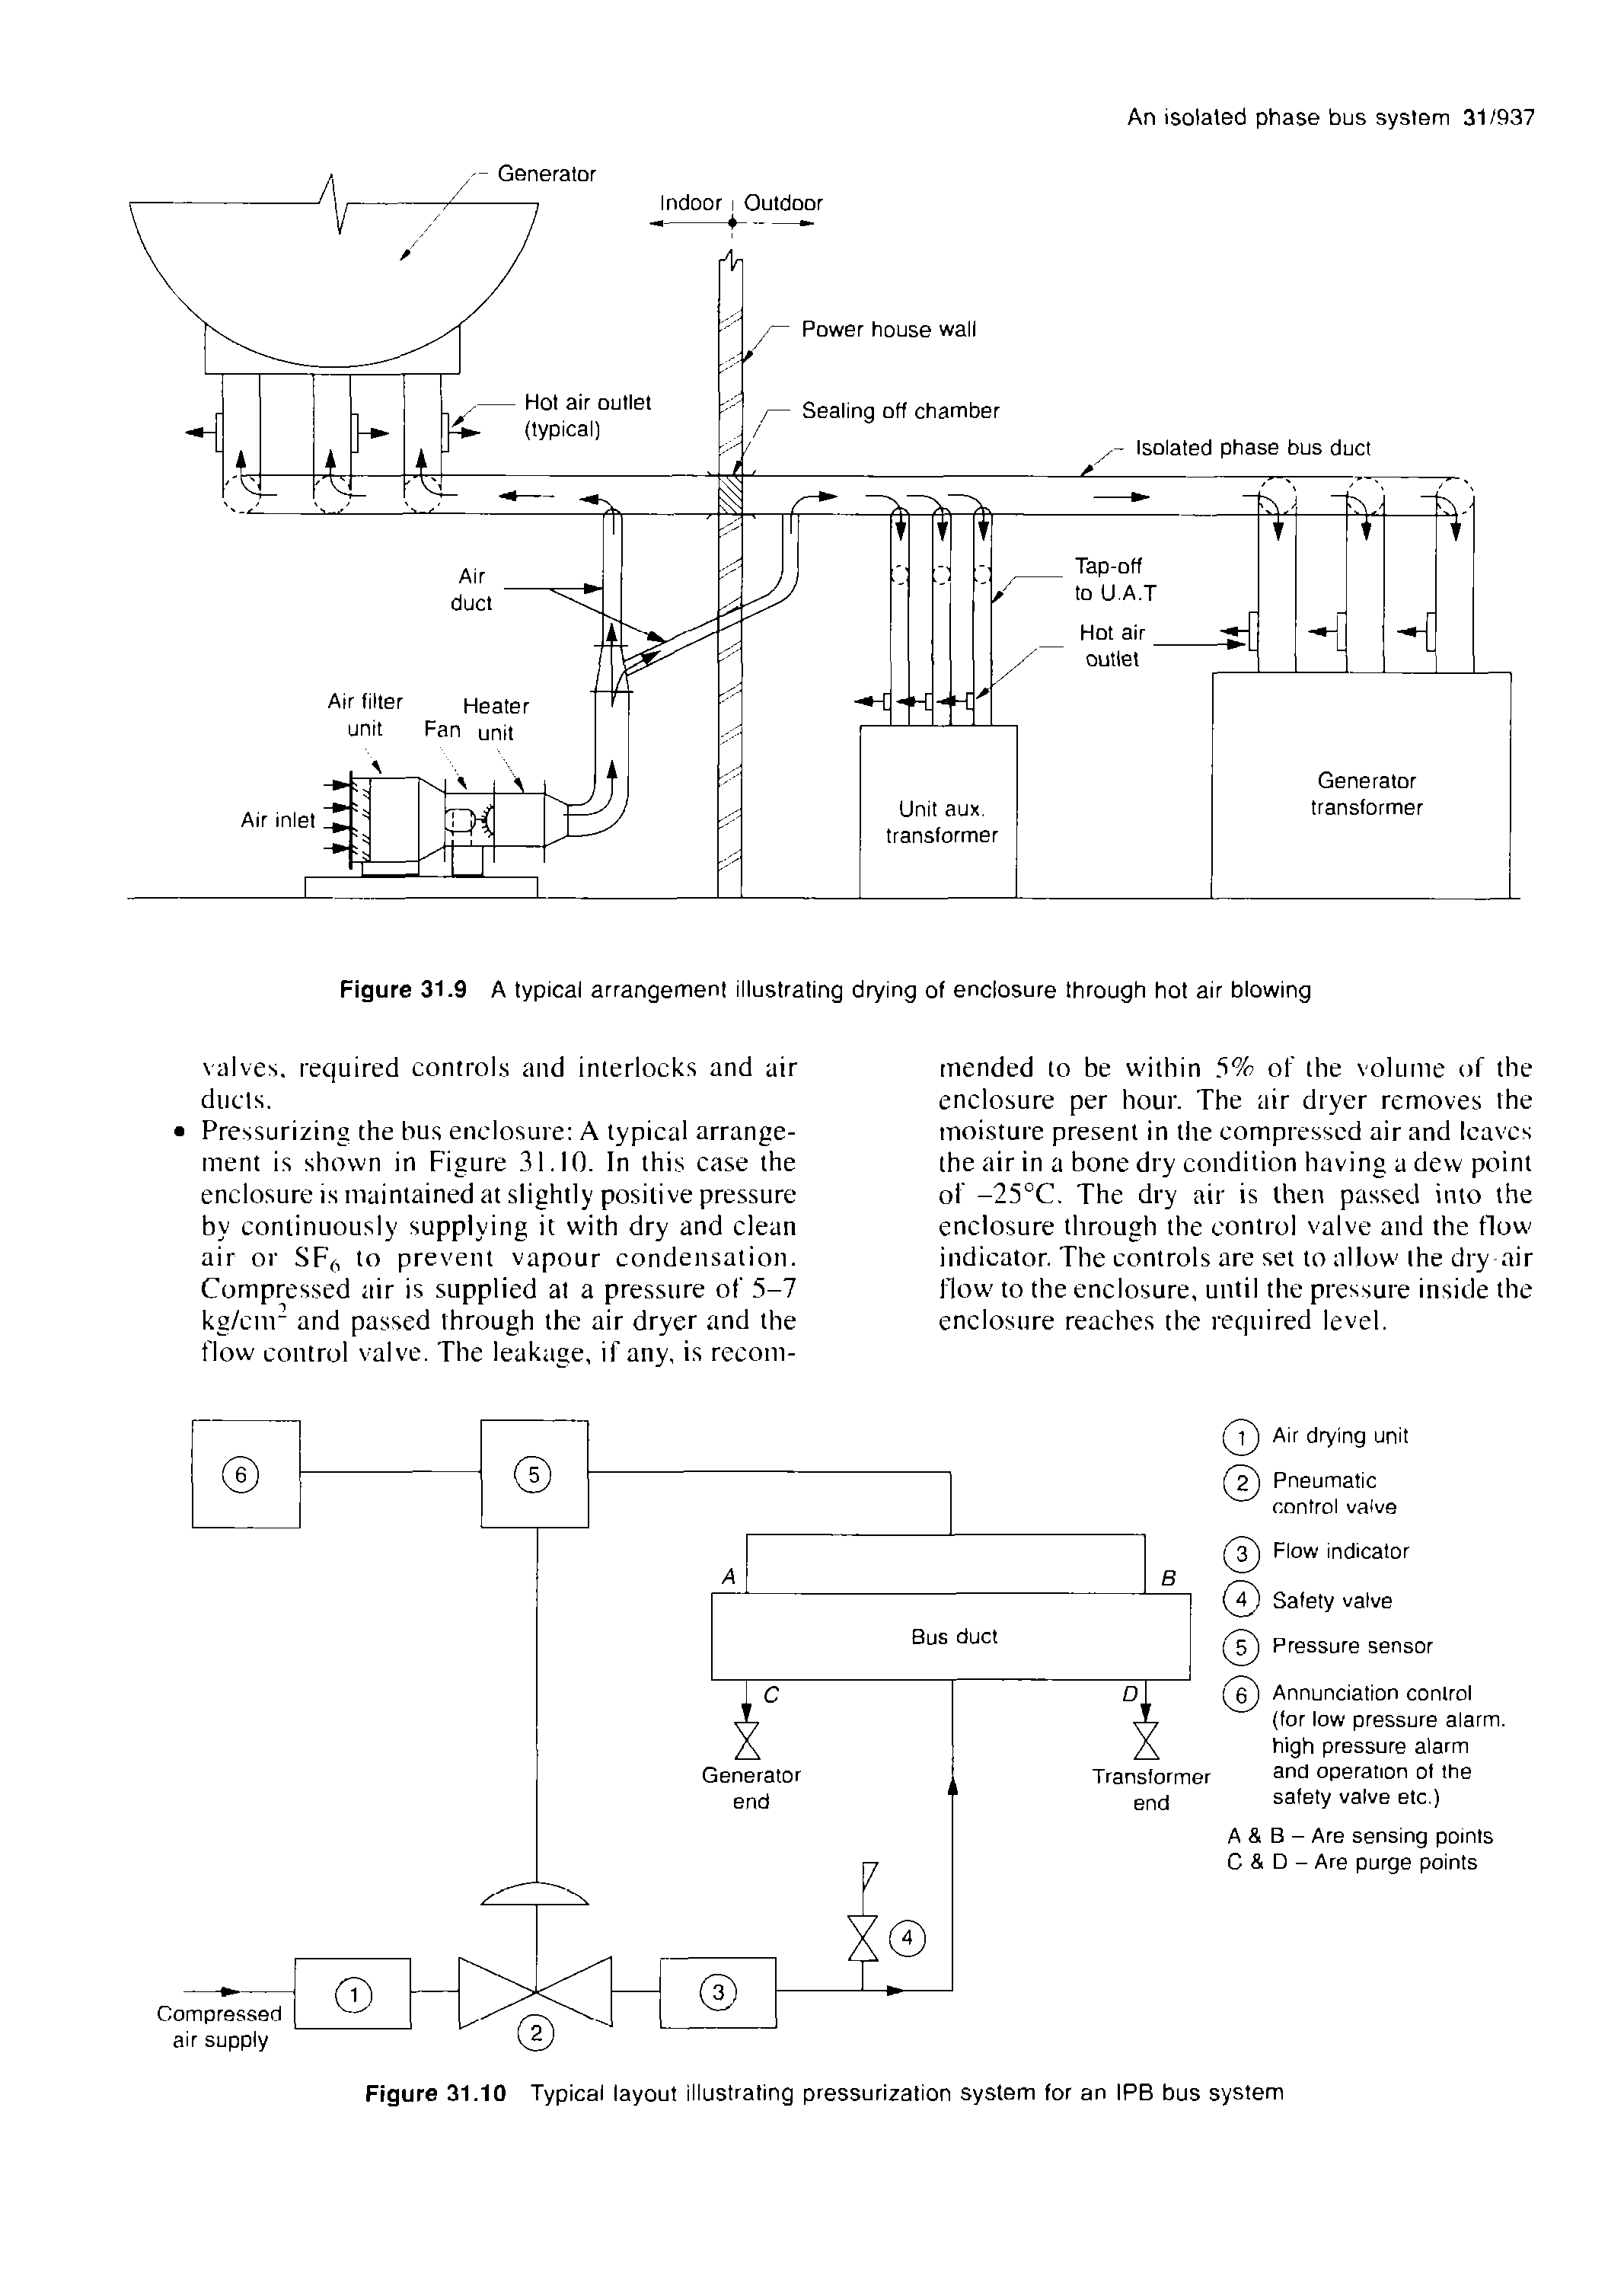 Figure 31.10 Typical layout illustrating pressurization system for an IPB bus system...